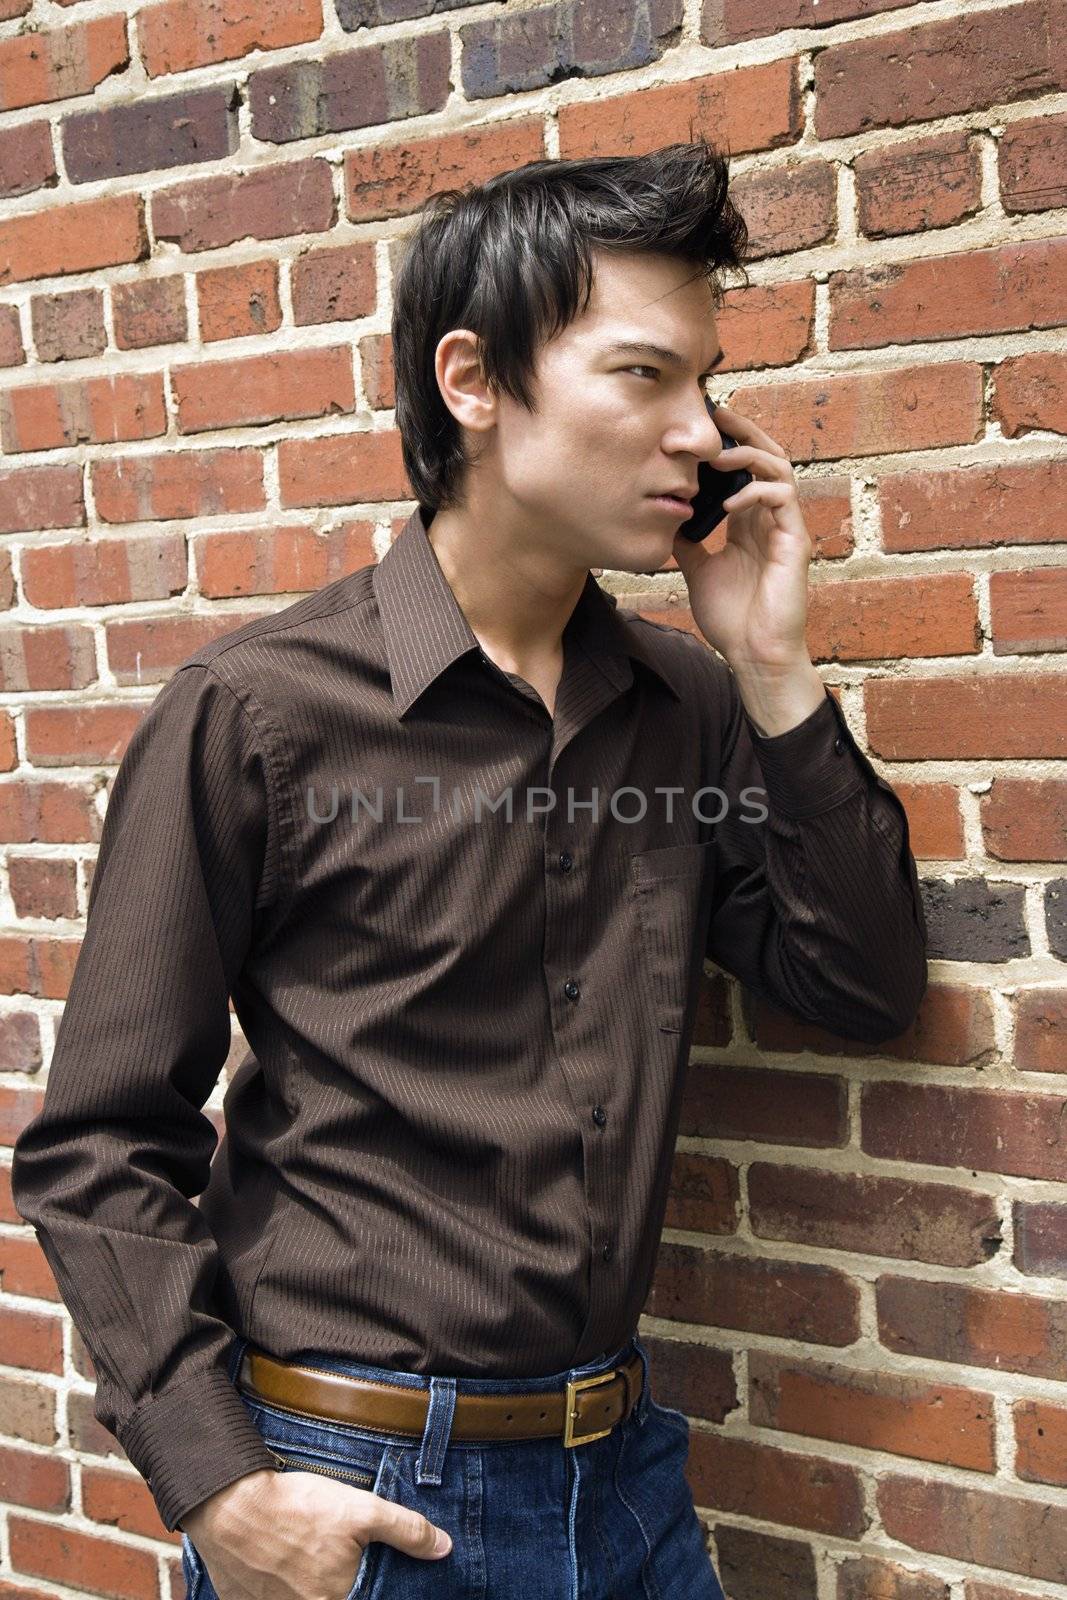 Young Asian man next to brick wall talking on cell phone.